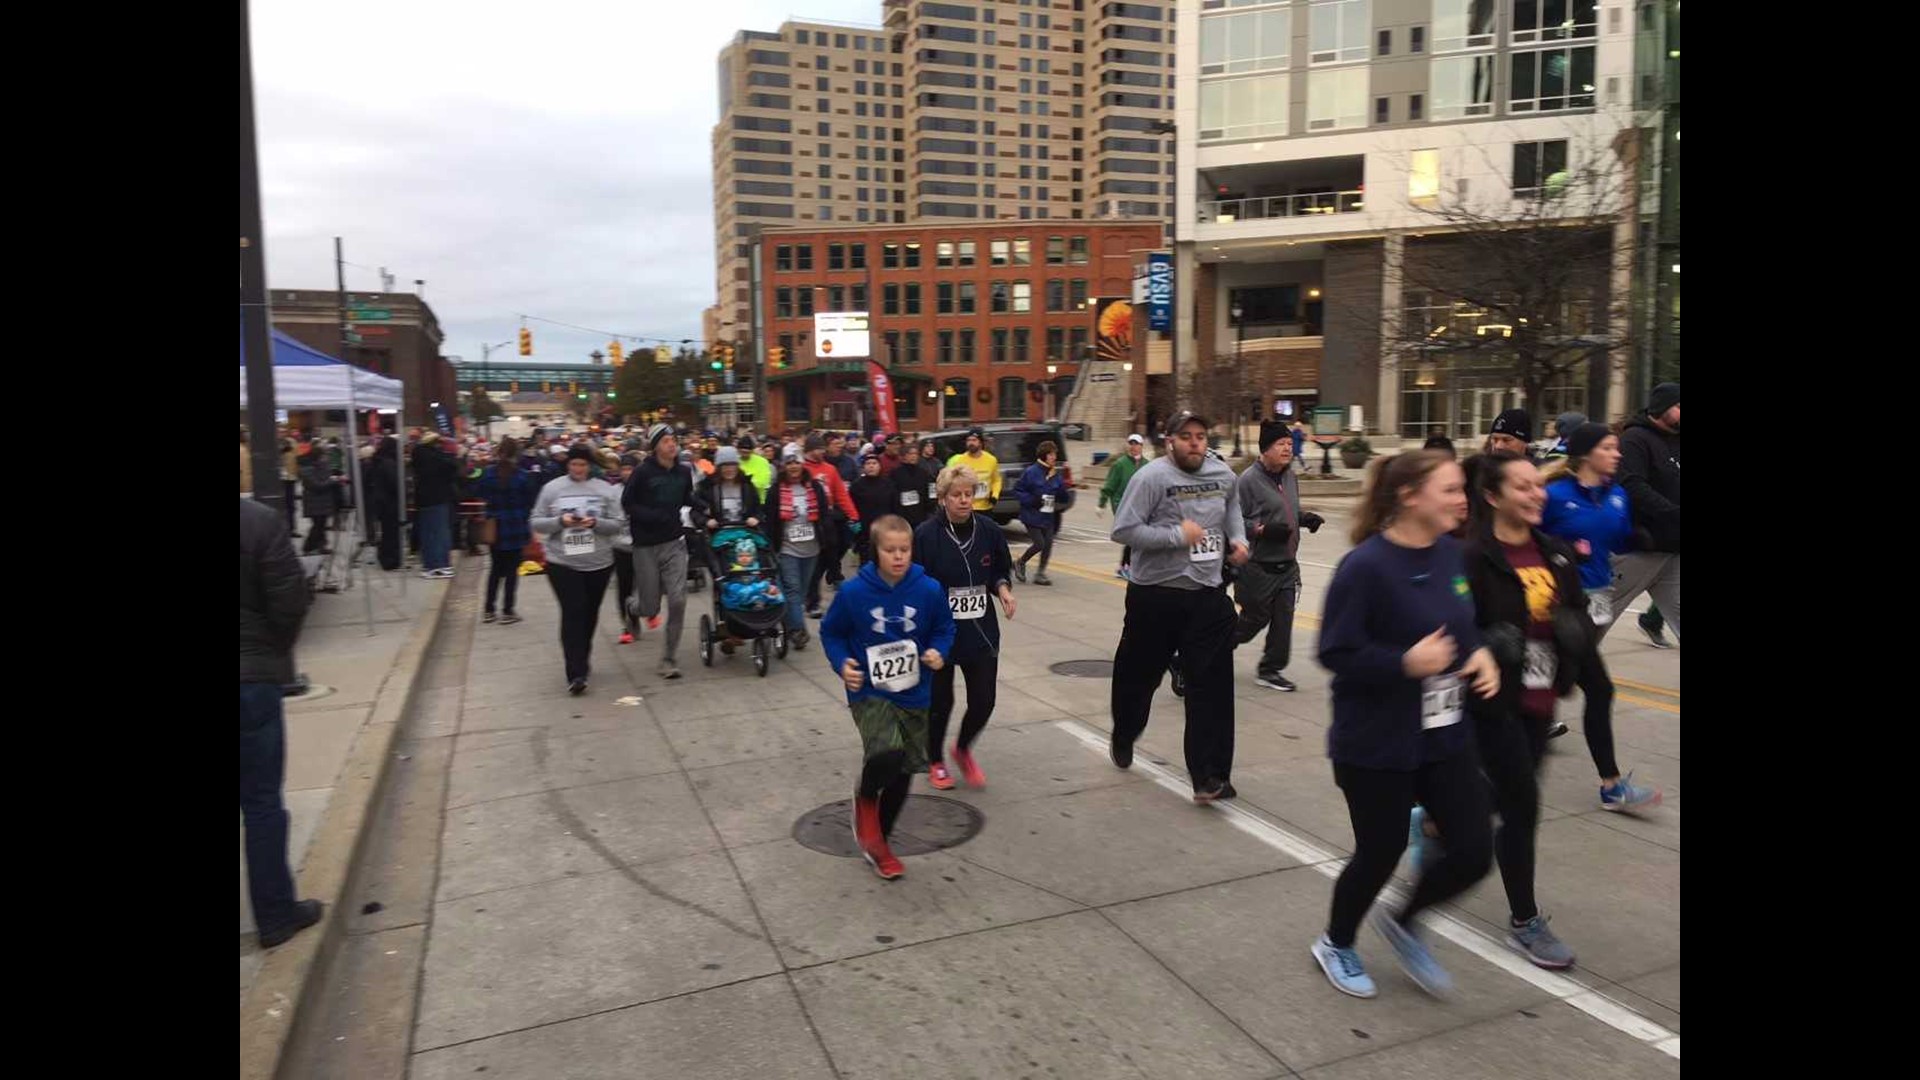 See how you can take part in the upcoming Turkey Trot downtown Grand Rapids.